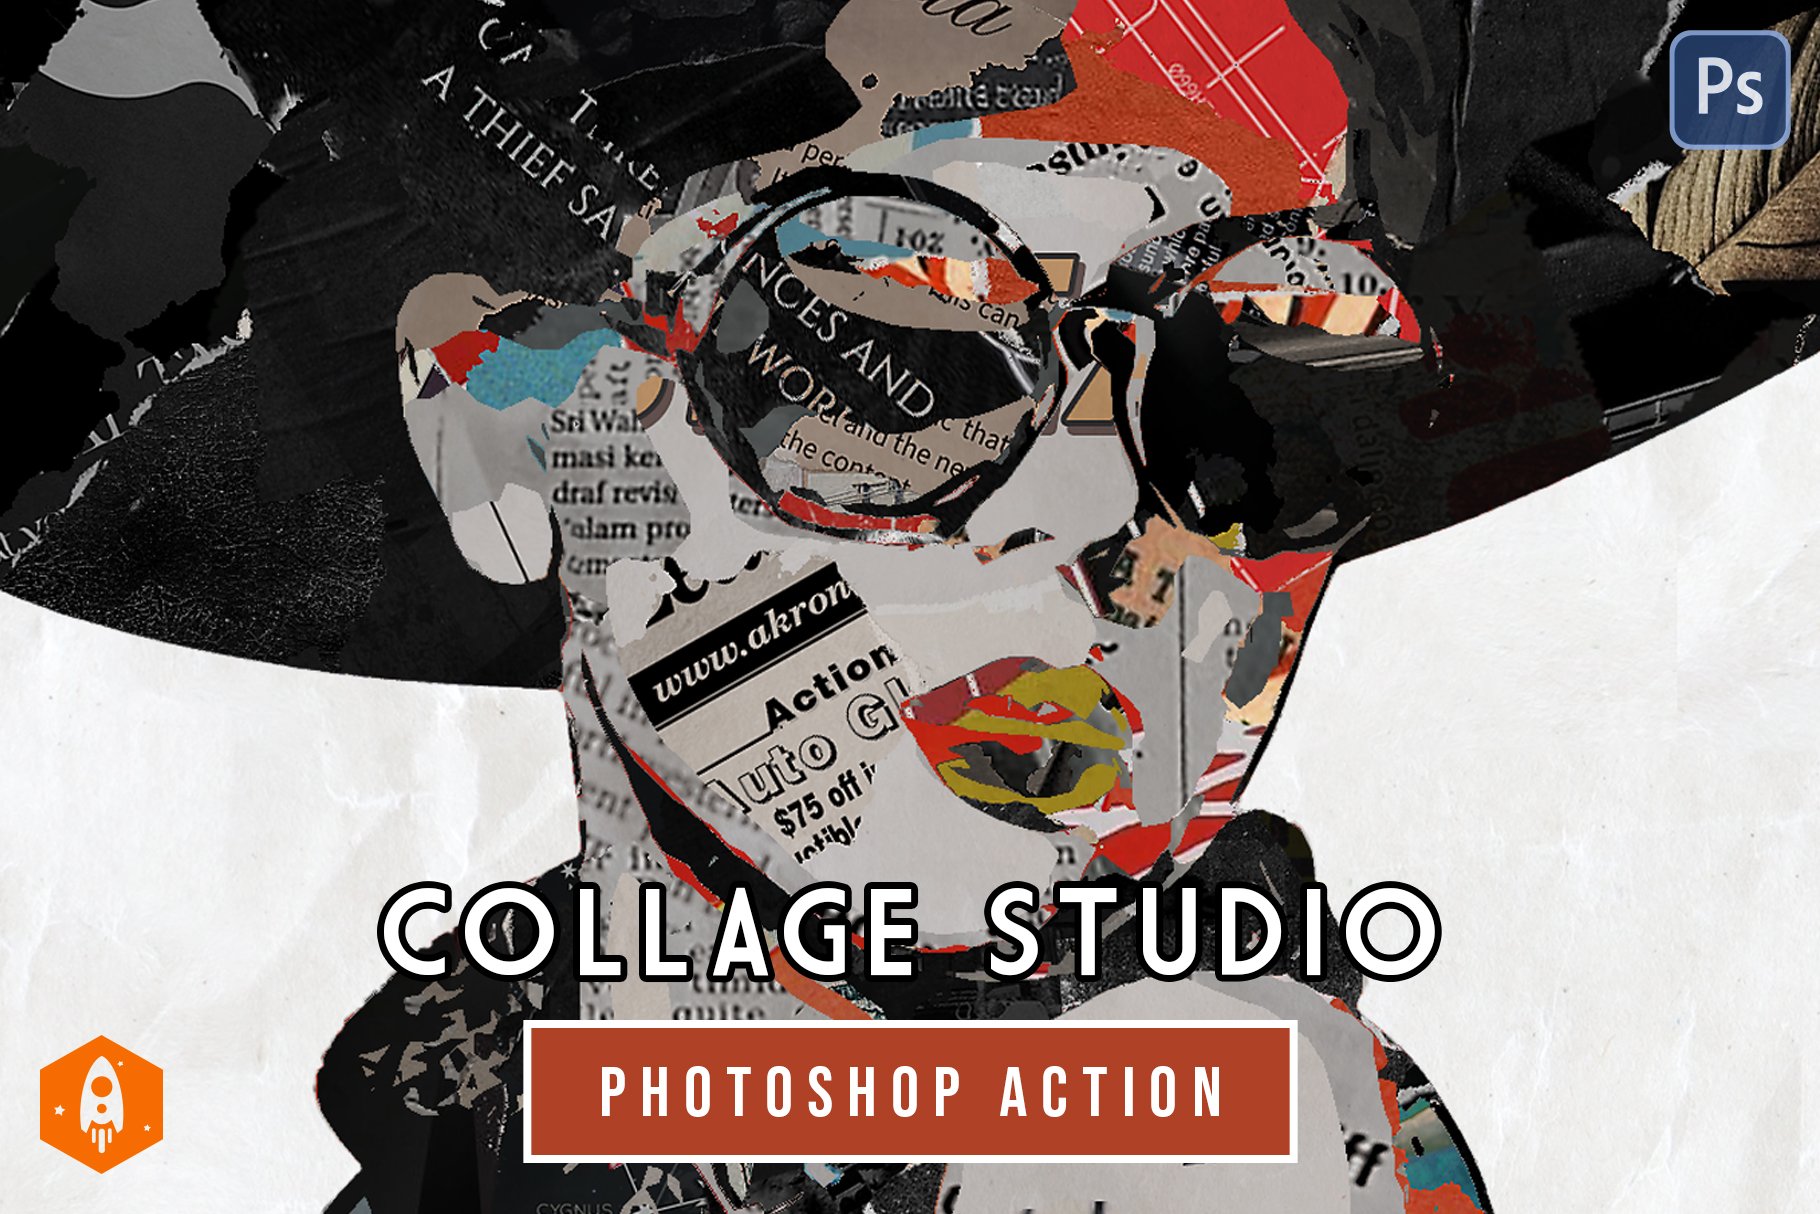 Design　Action　Collage　Effect　Collage　Studio　Paper　Cuts